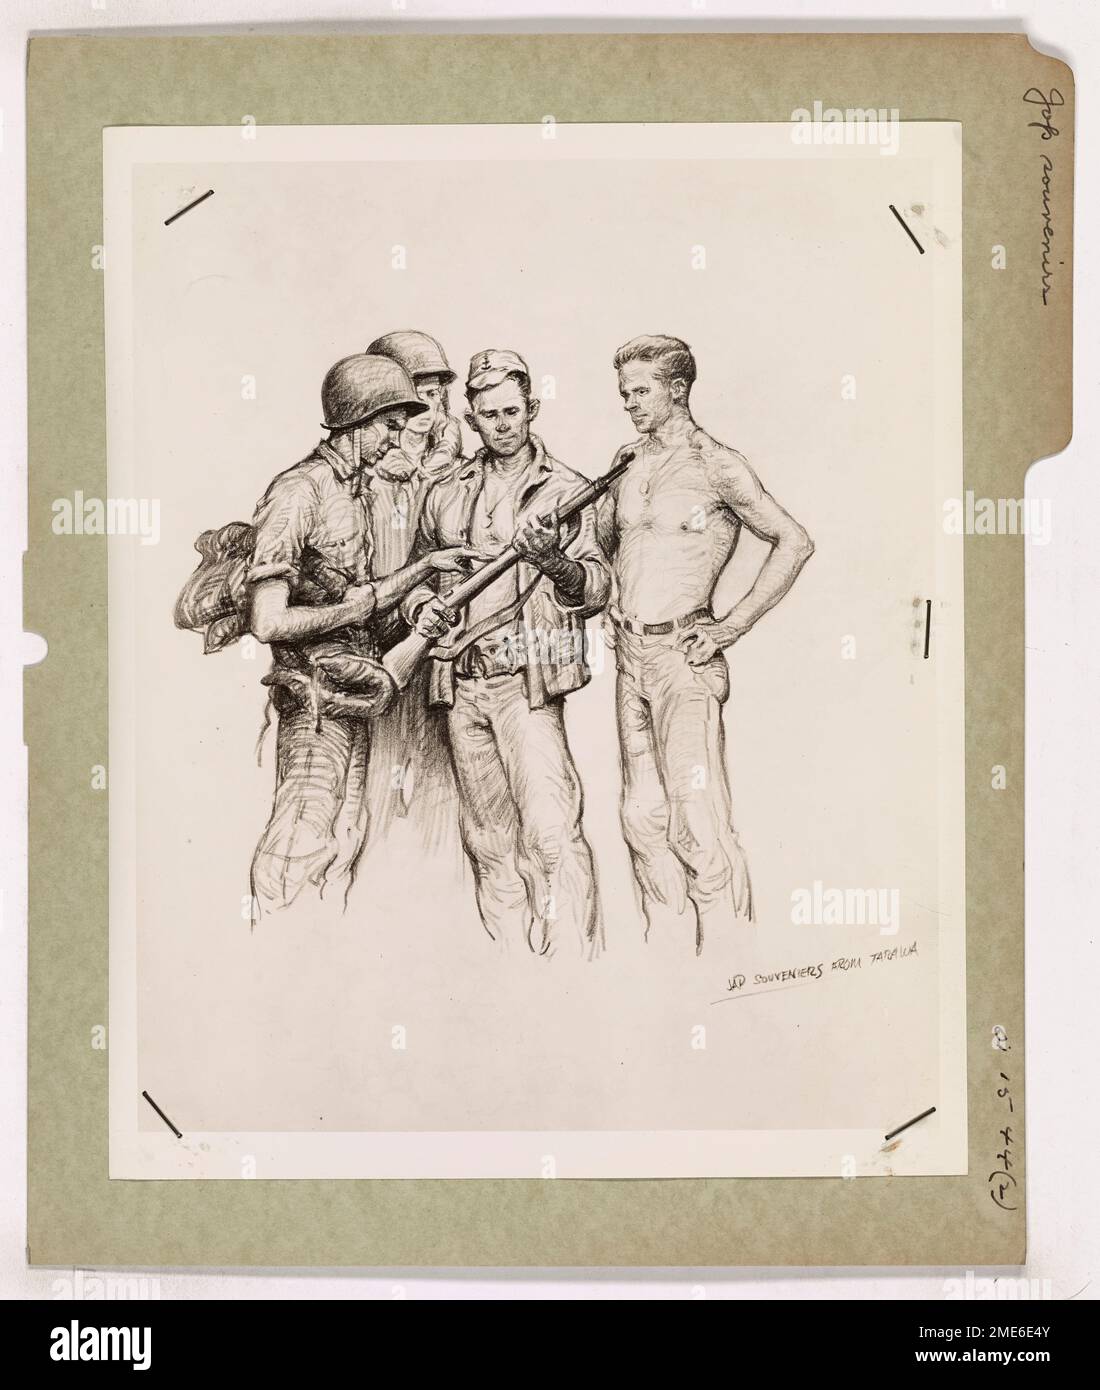 Photograph of Sketch by Ken Riley. 'Jap Souvenirs'. U.S. Coast Guardsmen examining souvenirs they picked up at Tarawa are sketched by Coast Guard Combat Artist Ken Riley. The 24-year-old artist is attached to a Coast Guard-manned combat transport that took part in the invasion of Tarawa. His home is in PARSONS, KANSAS. Stock Photo